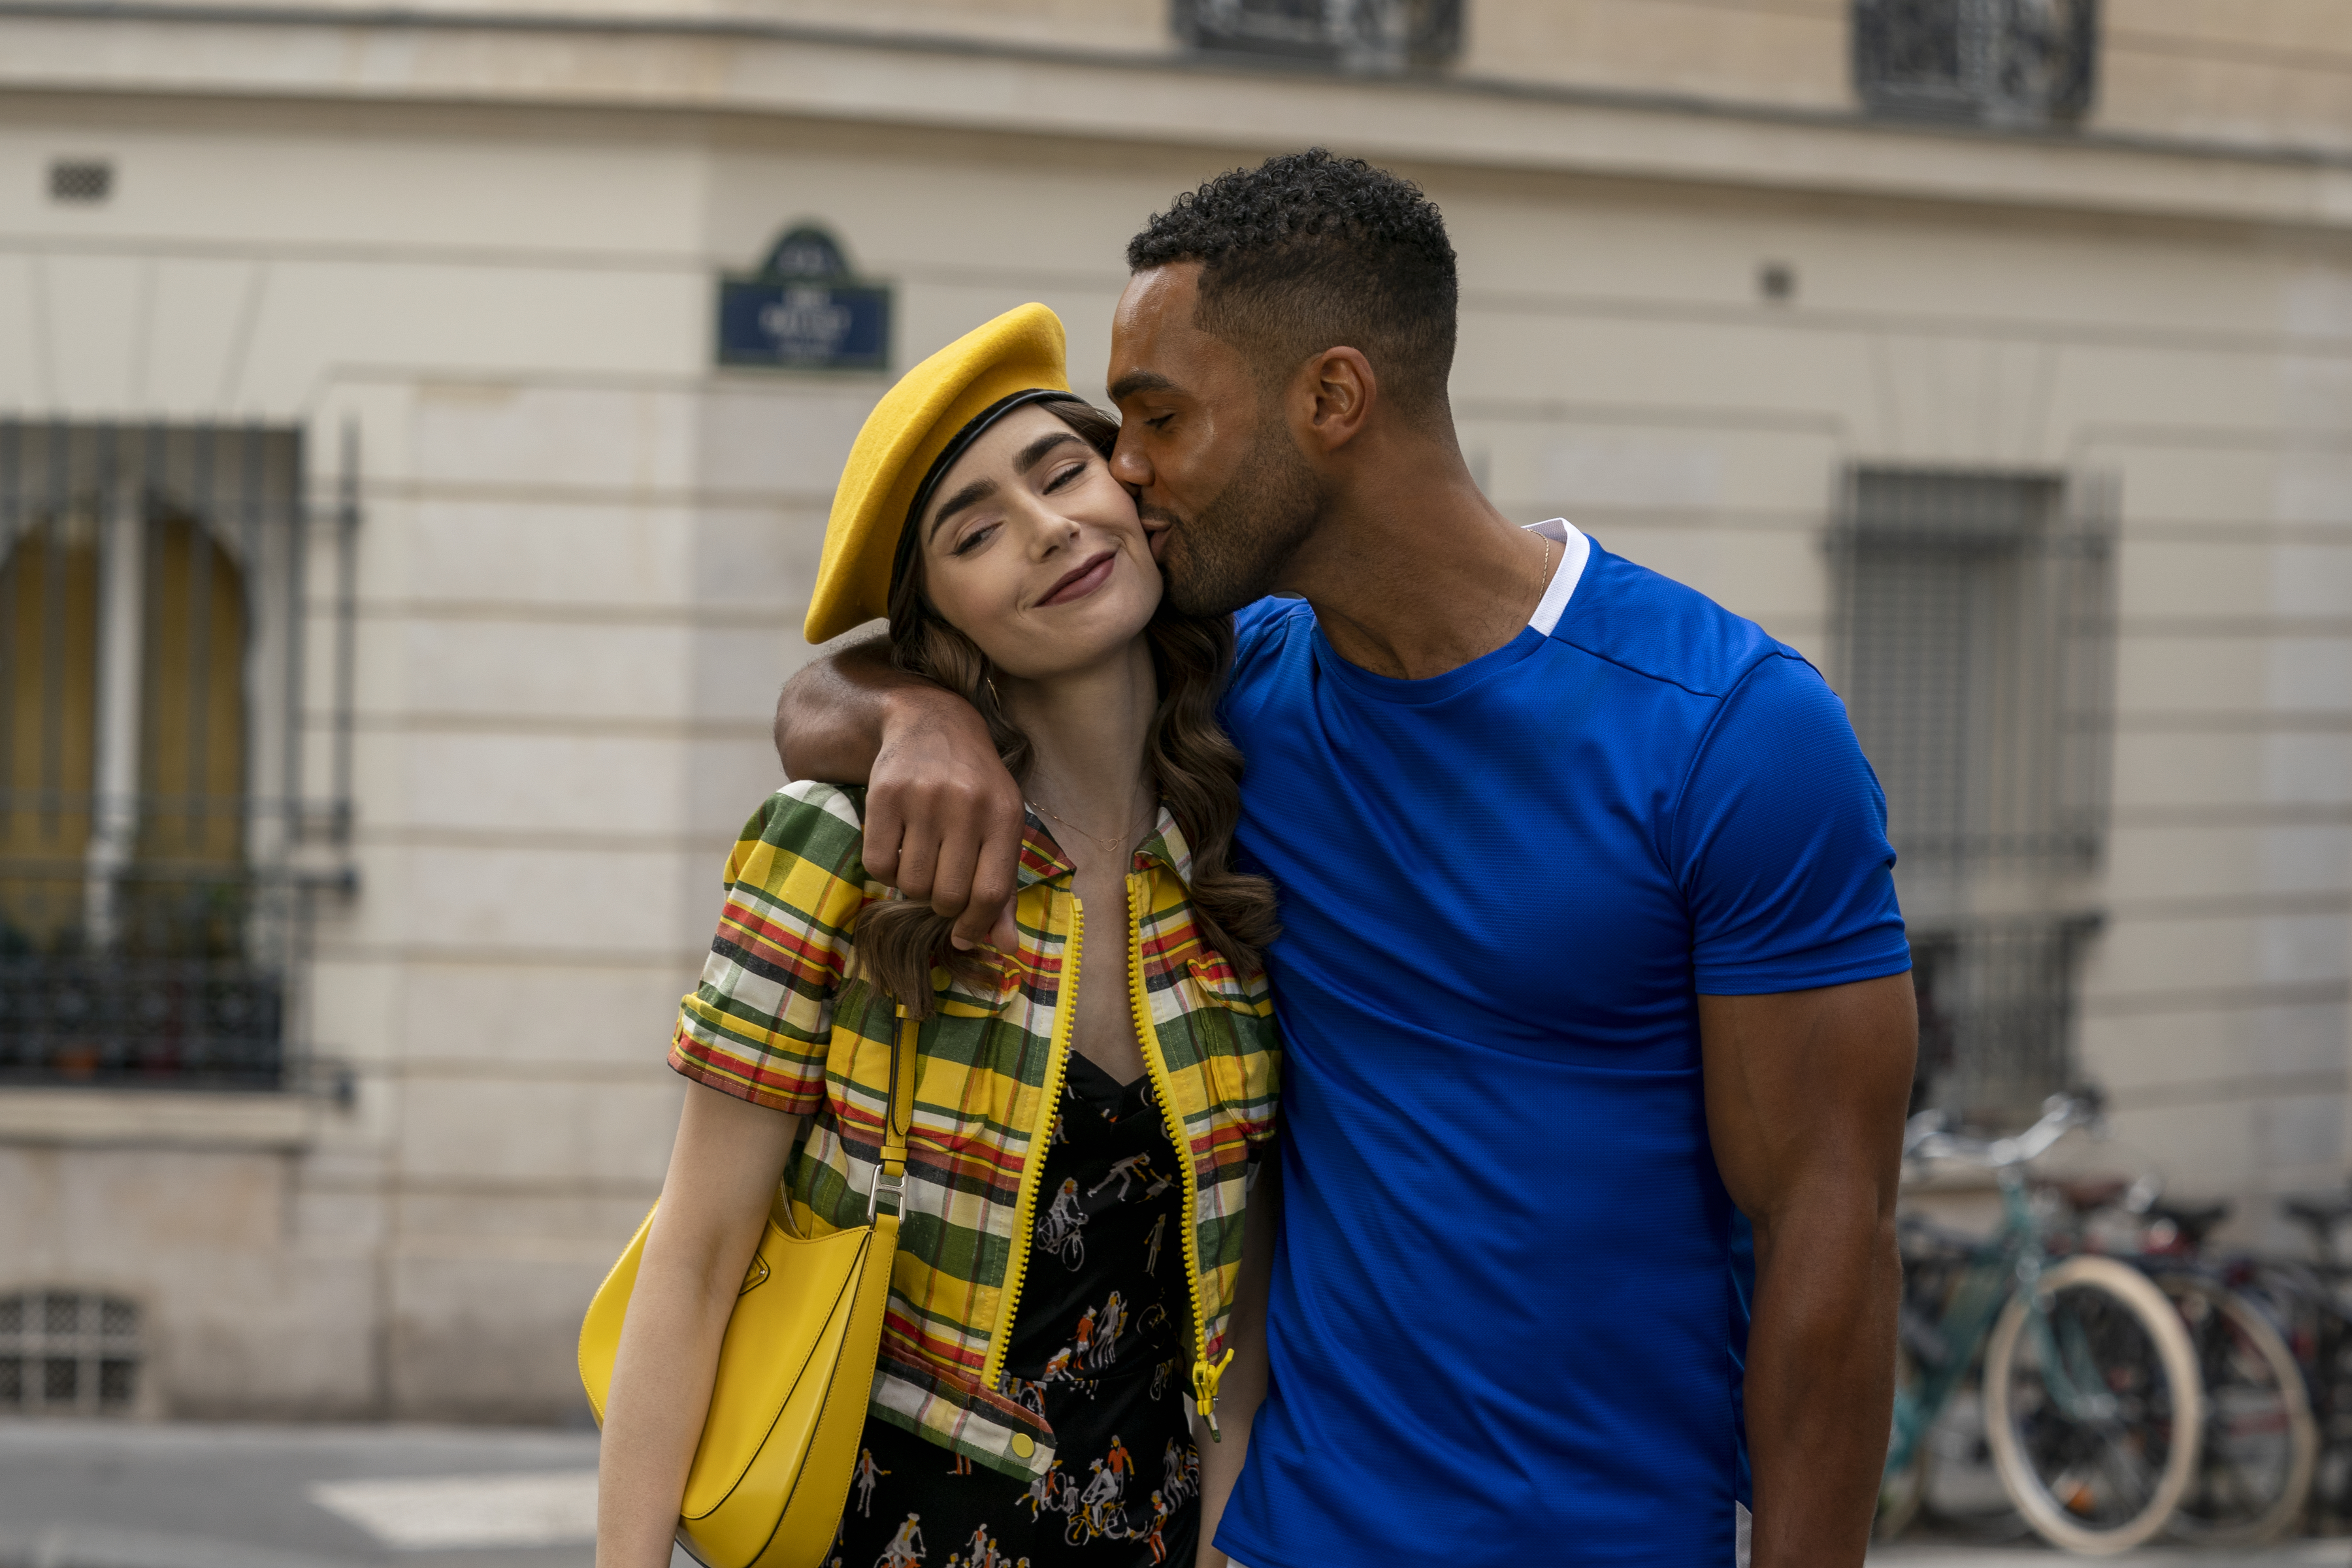 Emily in Paris': All the Bad Parts About Season 3